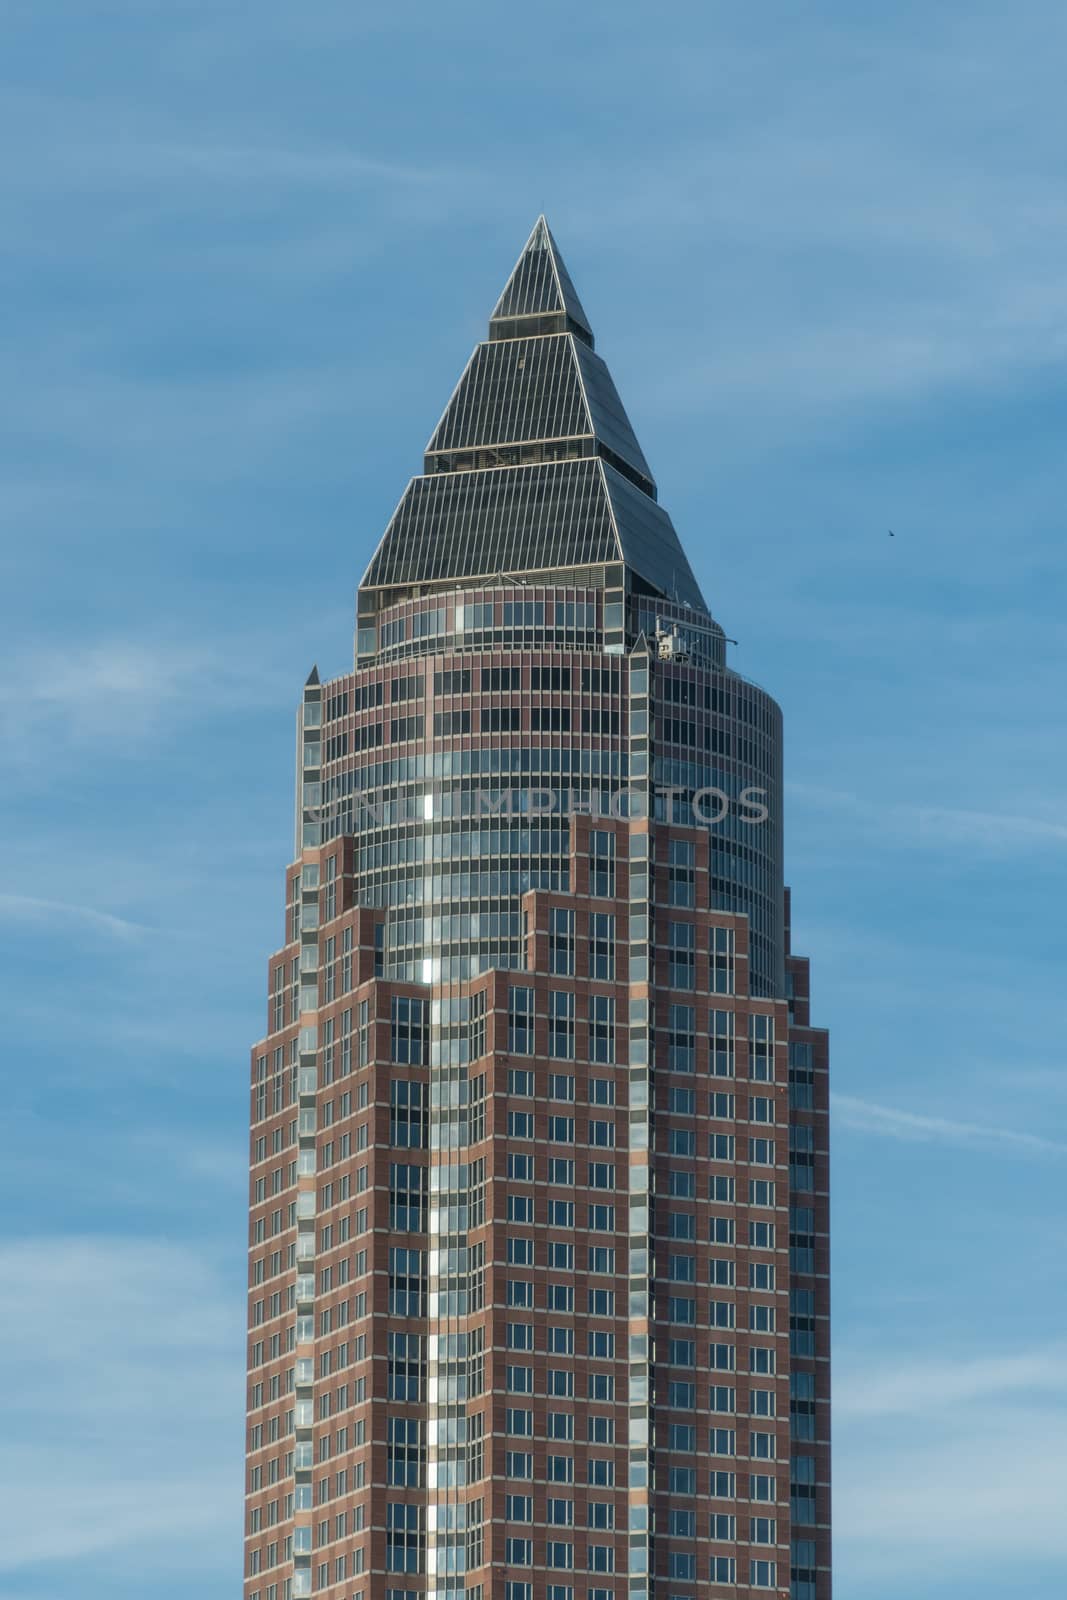 Skyscraper in Frankfurt Germany at sunny day with blue sky by MXW_Stock